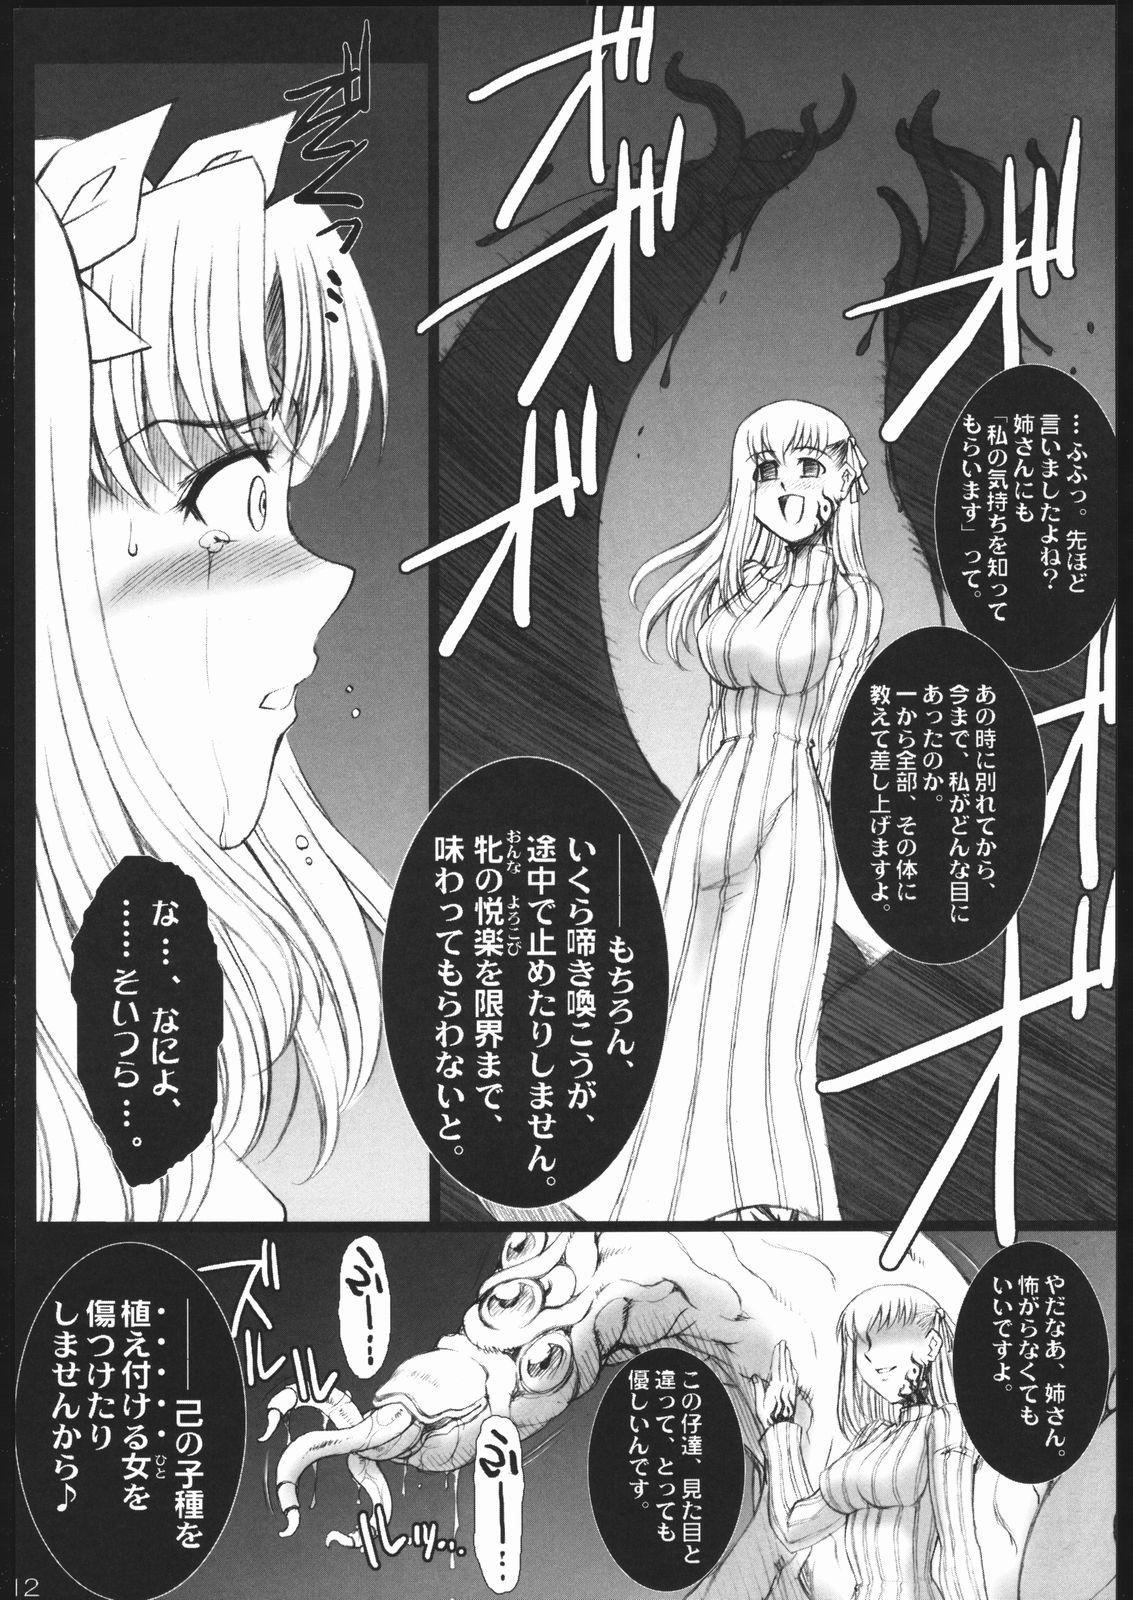 Cream Pie Red Degeneration - Fate stay night The - Page 11